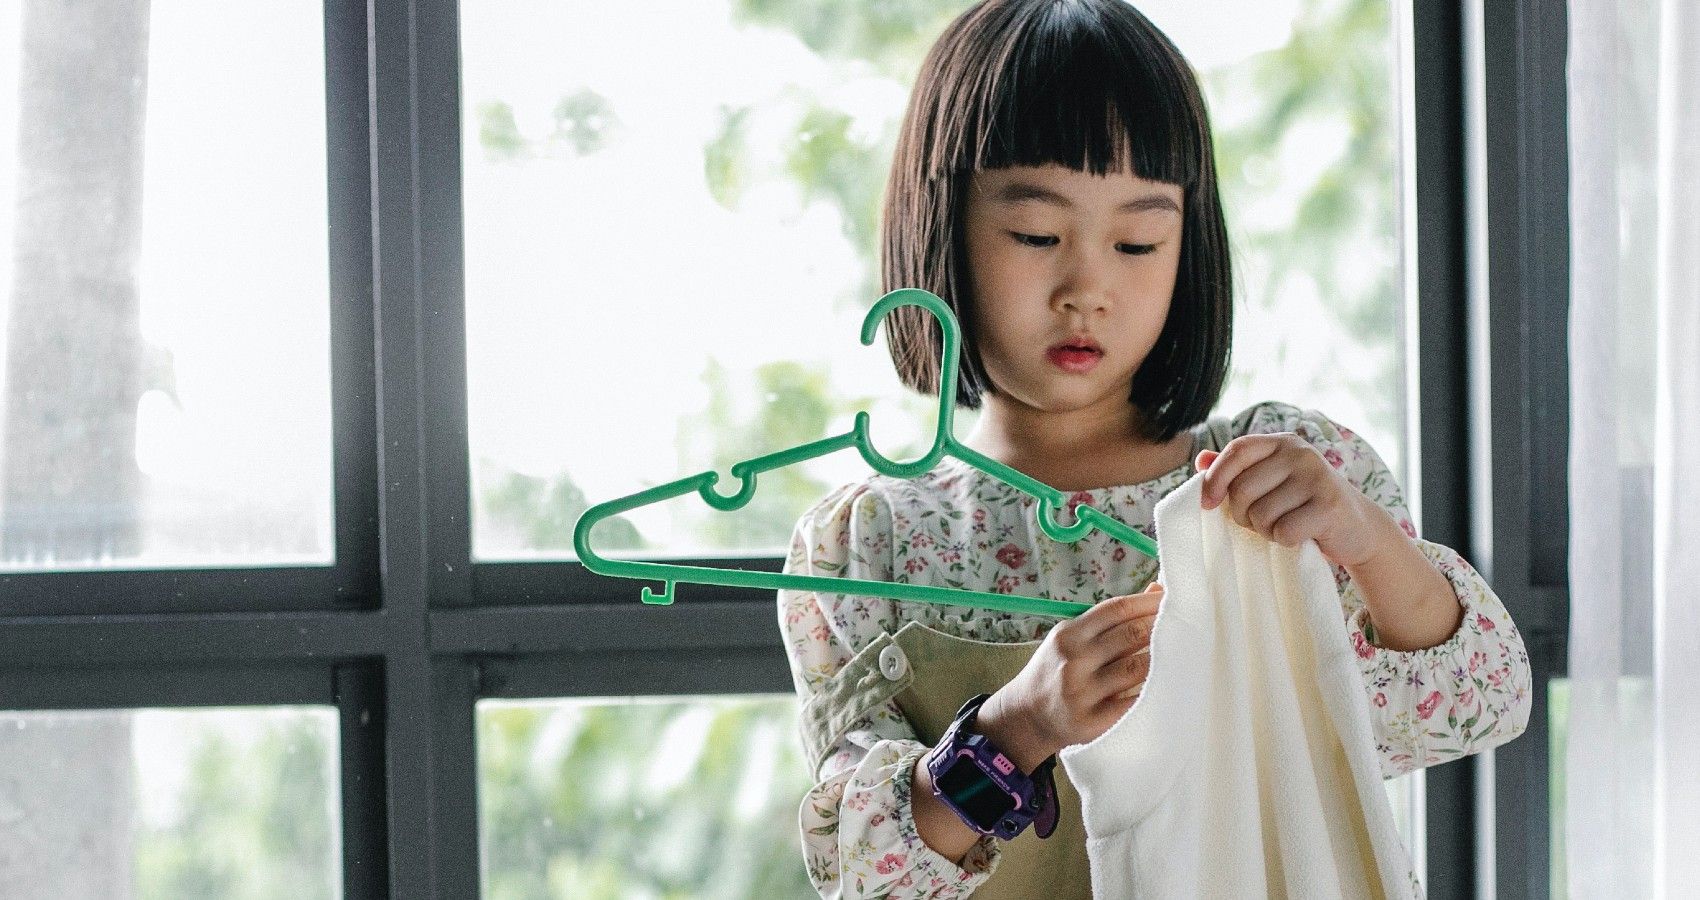 A child putting clothes on a hanger